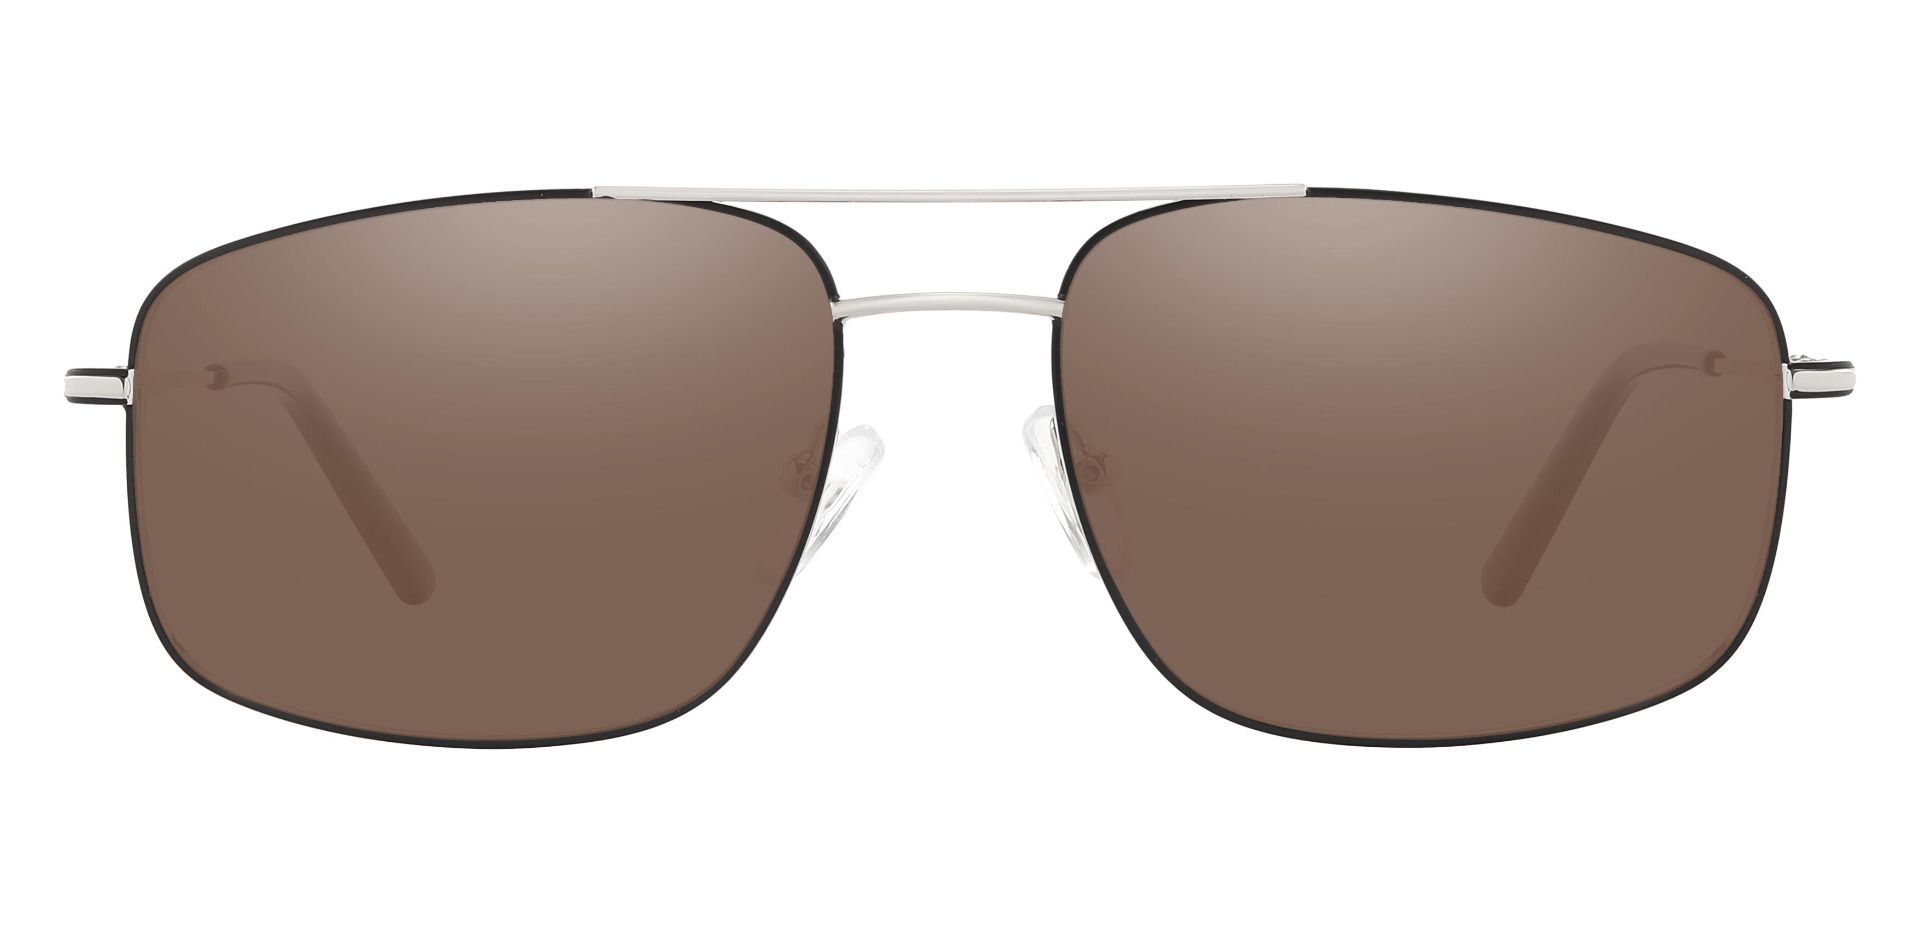 Turner Aviator Non-Rx Sunglasses - Silver Frame With Brown Lenses